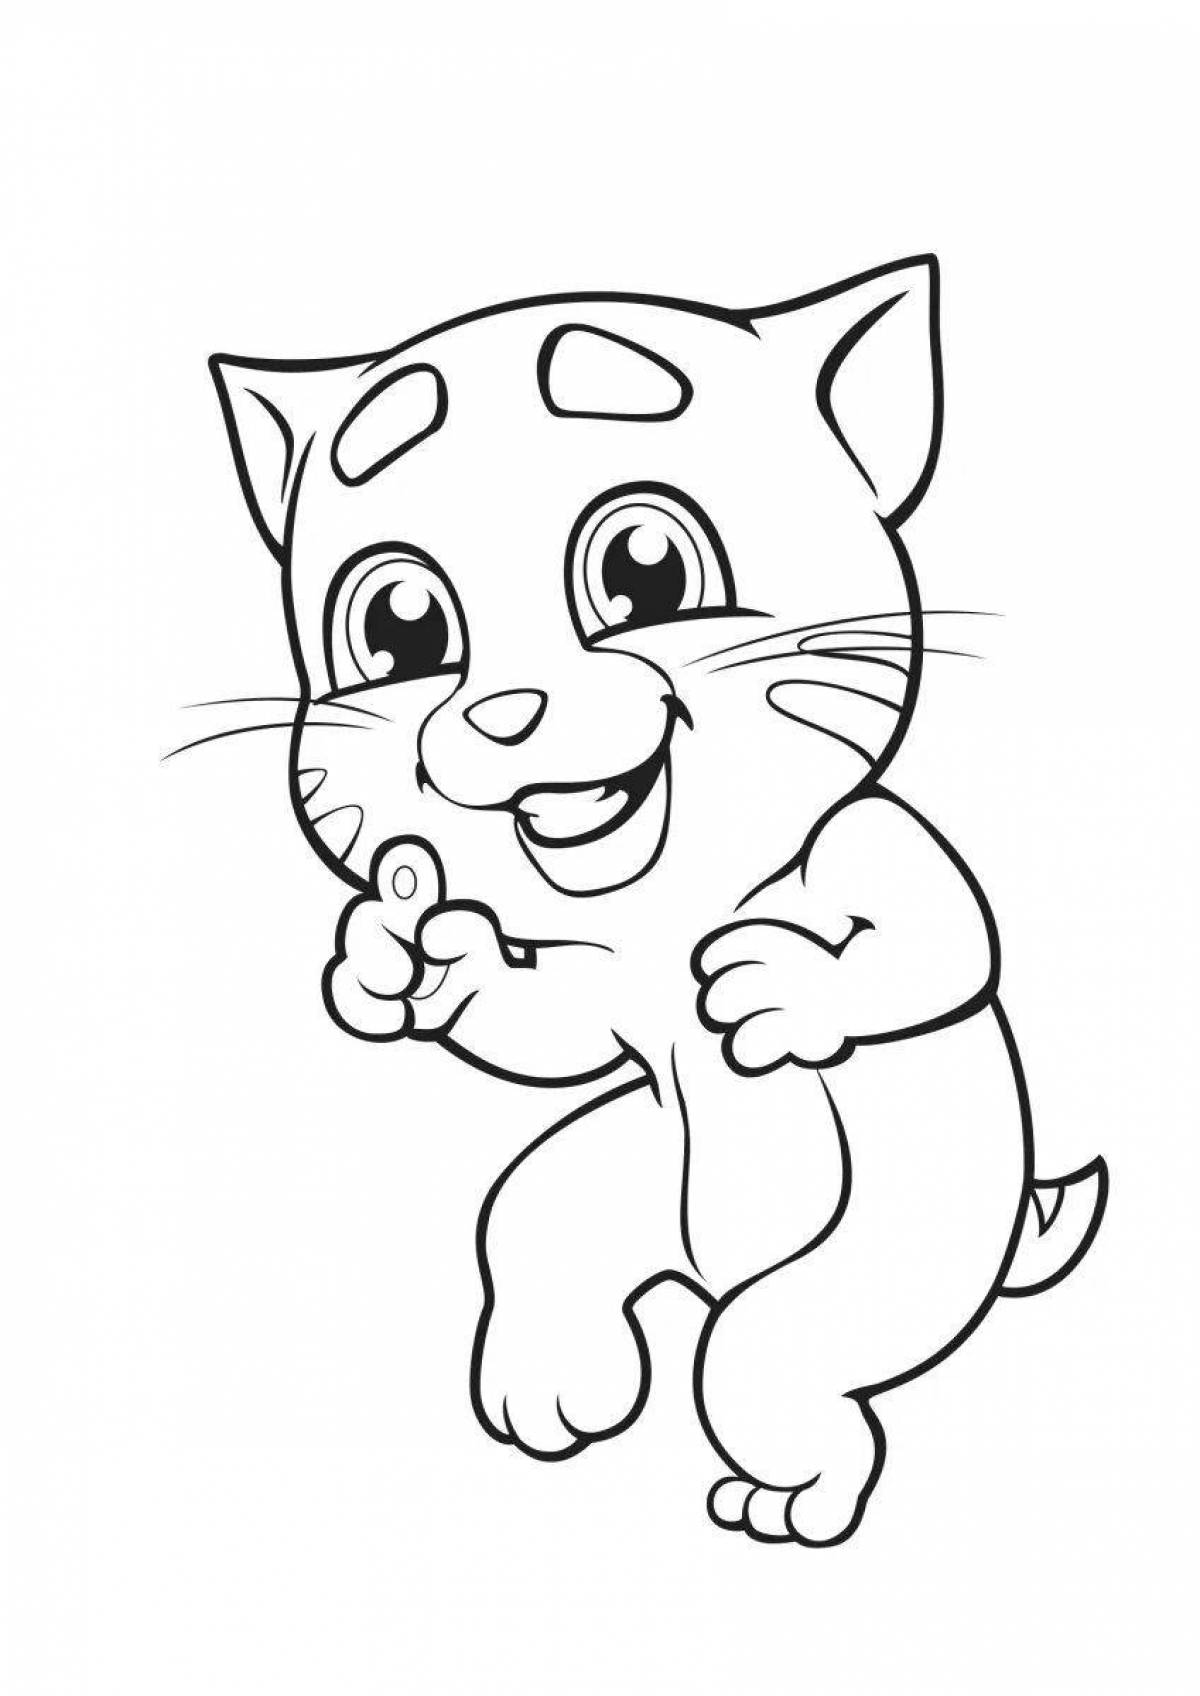 Great tom and angel coloring pages for kids